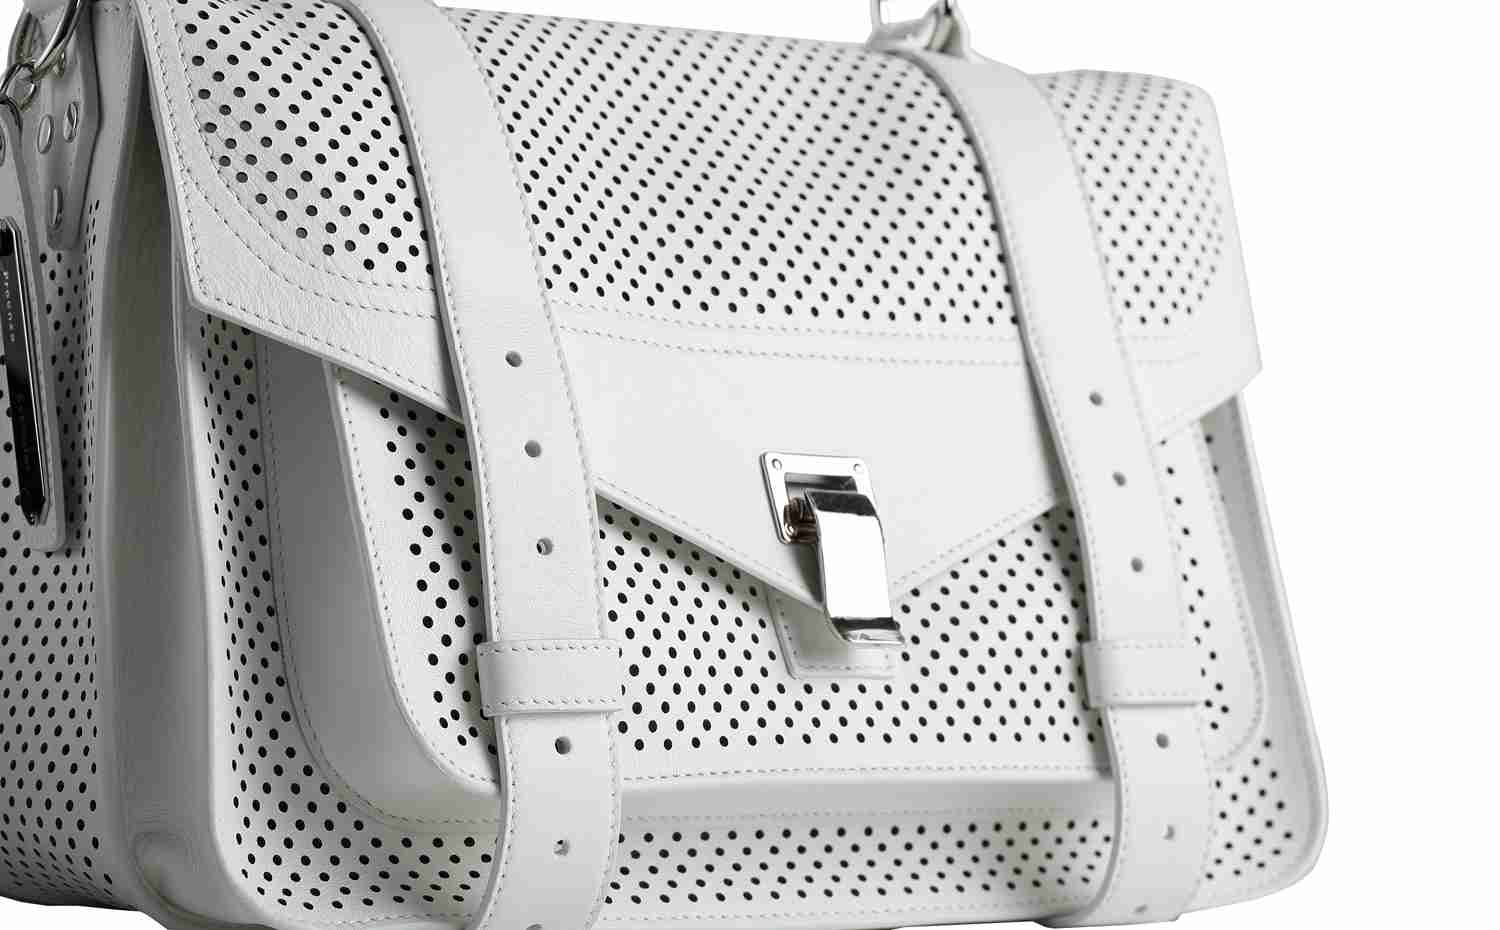 Proenza Schouler - PIN Collection PS1 Medium in White